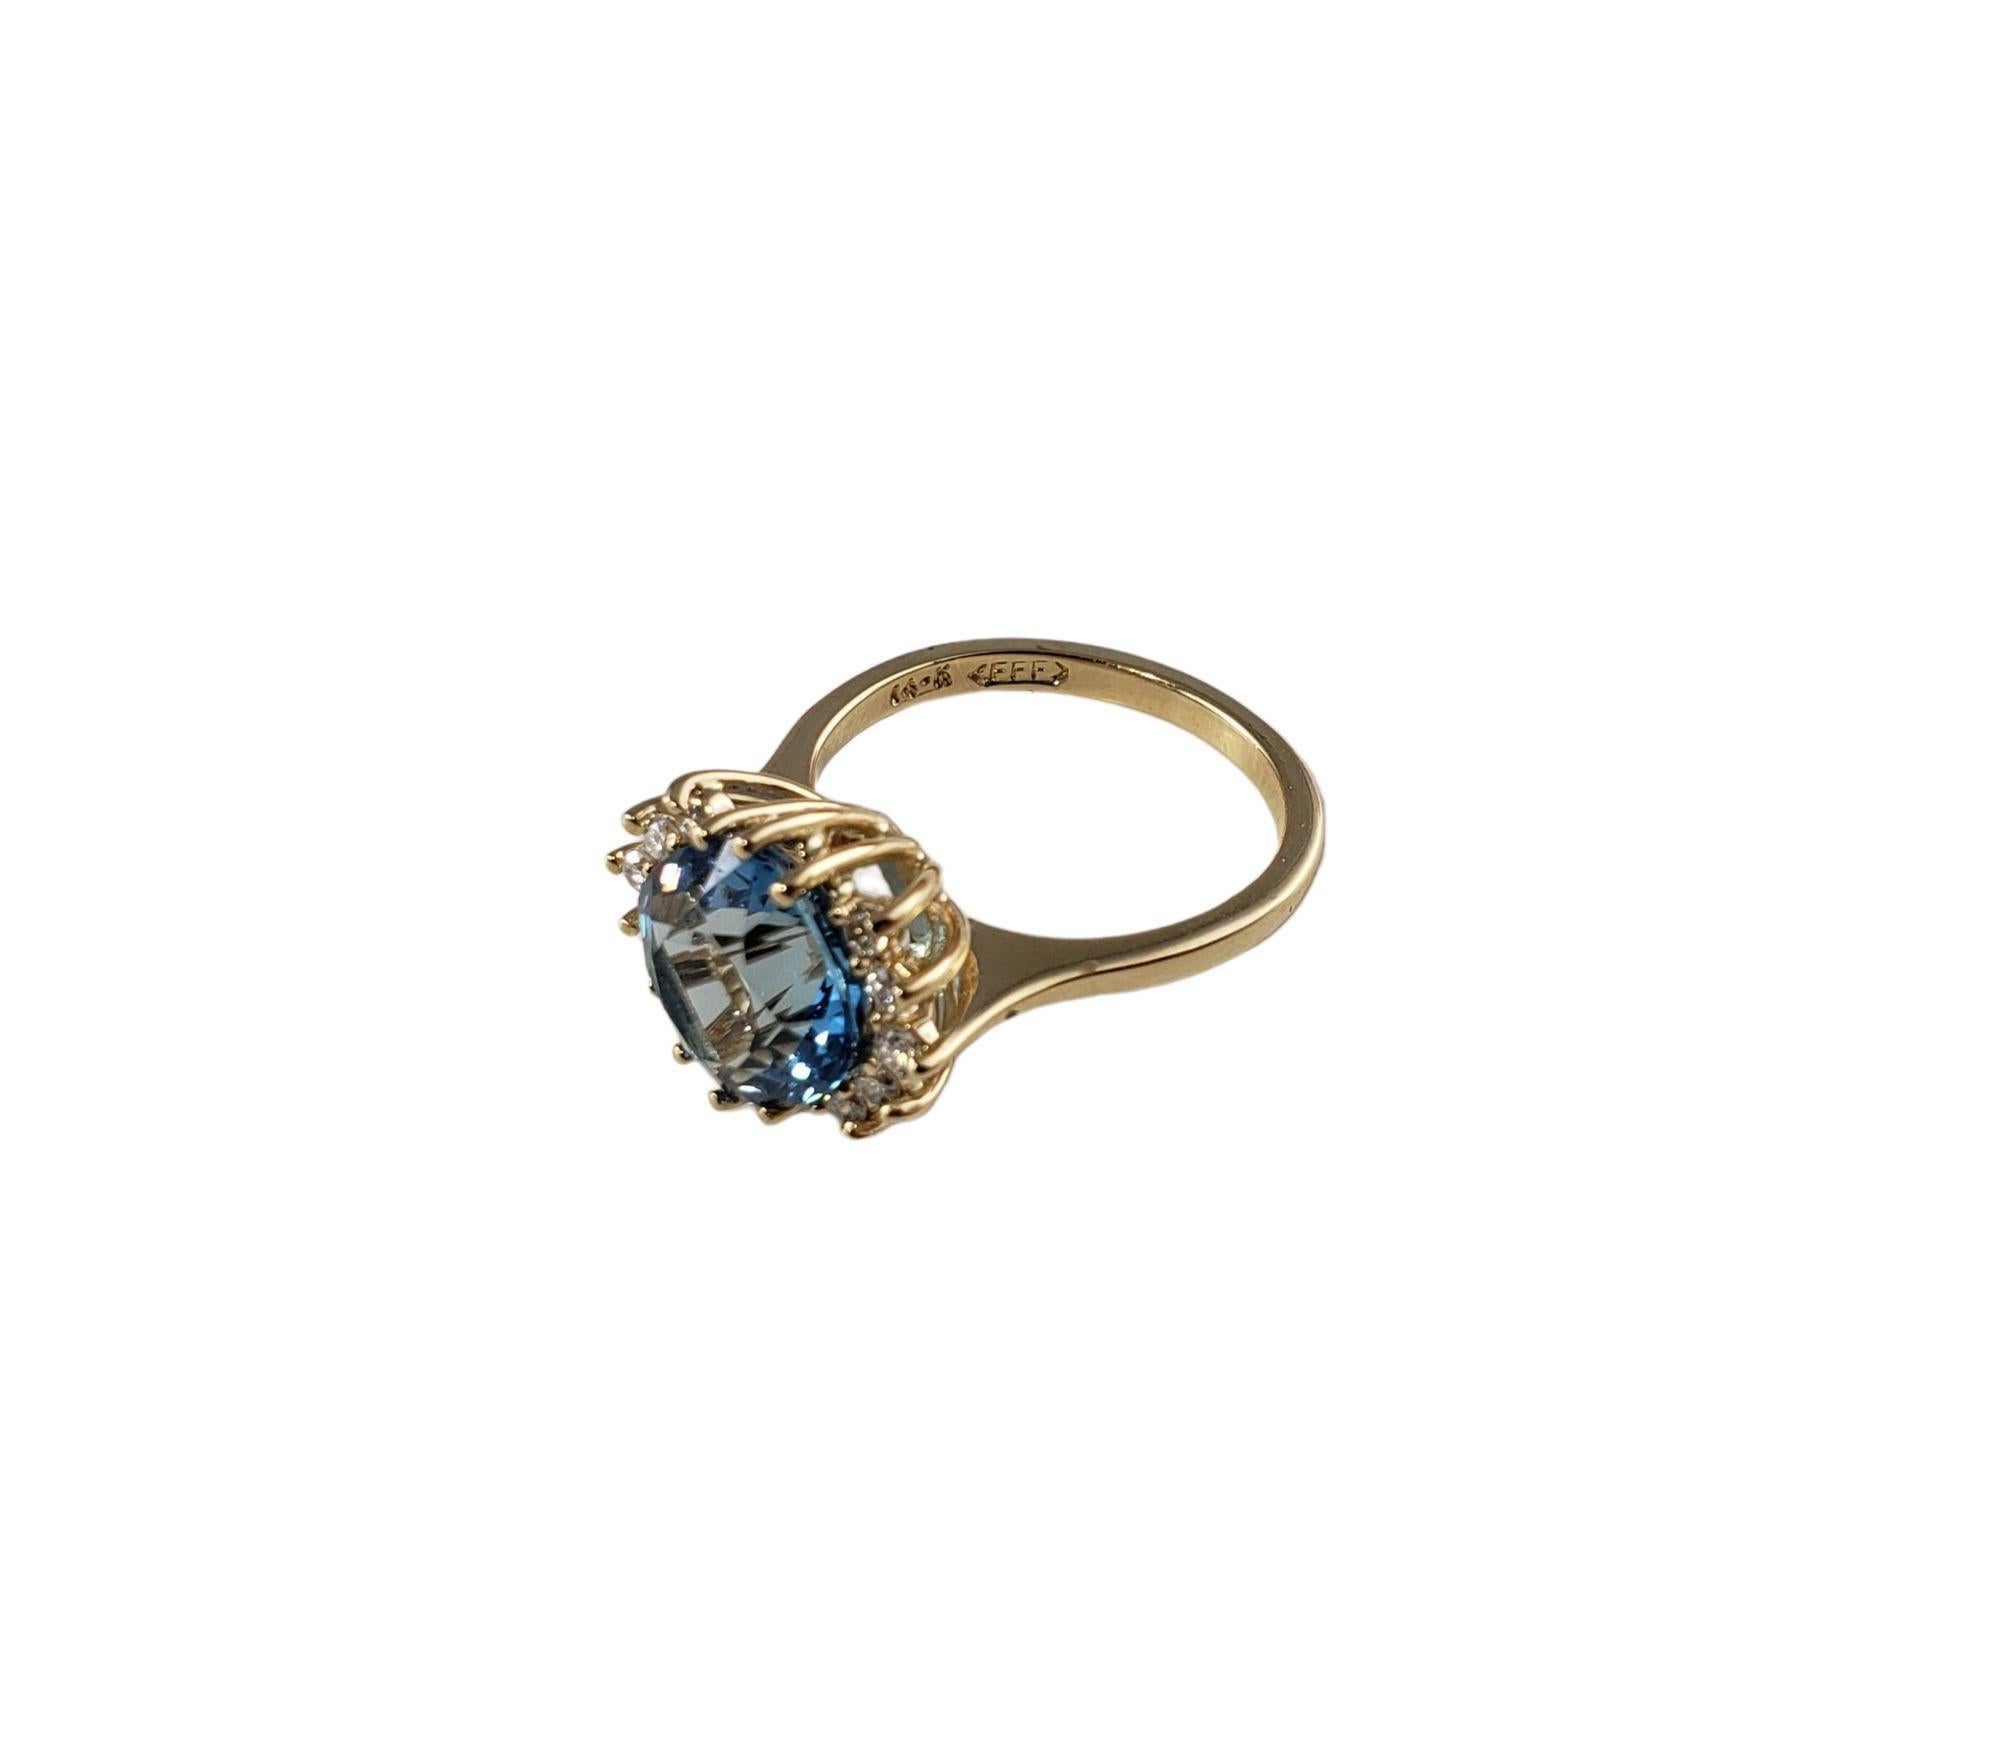 Vintage 14 Karat Yellow Gold Blue Topaz and Diamond Ring Size 6.25 JAGi Certified-

This stunning ring features one square cushion cut blue topaz surrounded by ten round brilliant cut diamond set in classic 14k yellow gold. Width: 1 1 mm. Shank: 2